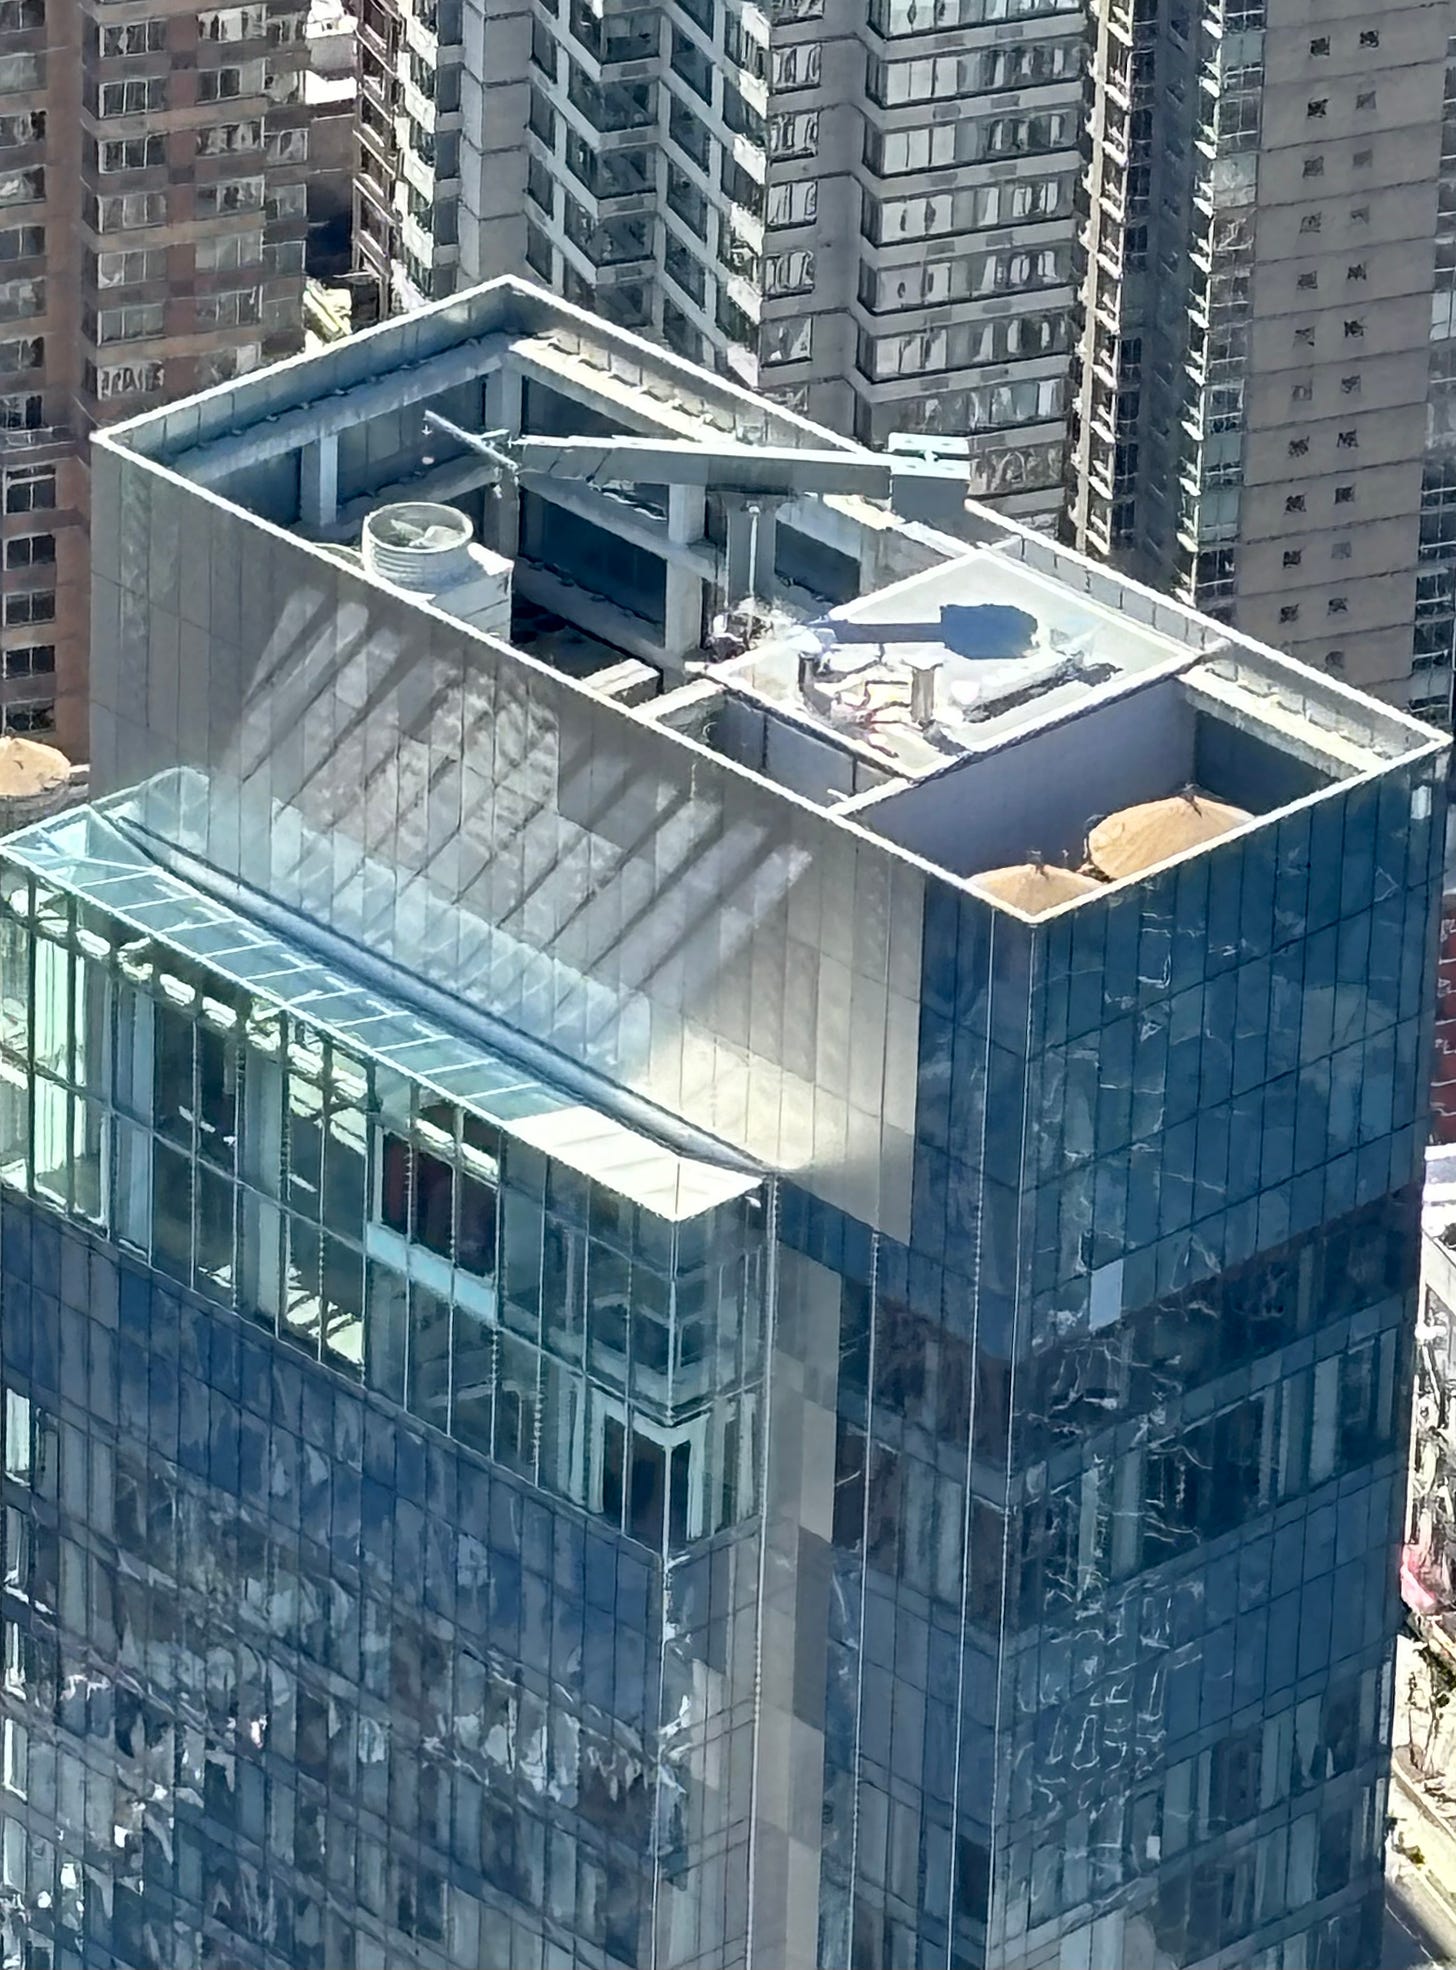 A close-up of the open roof where two roof tanks are visible.